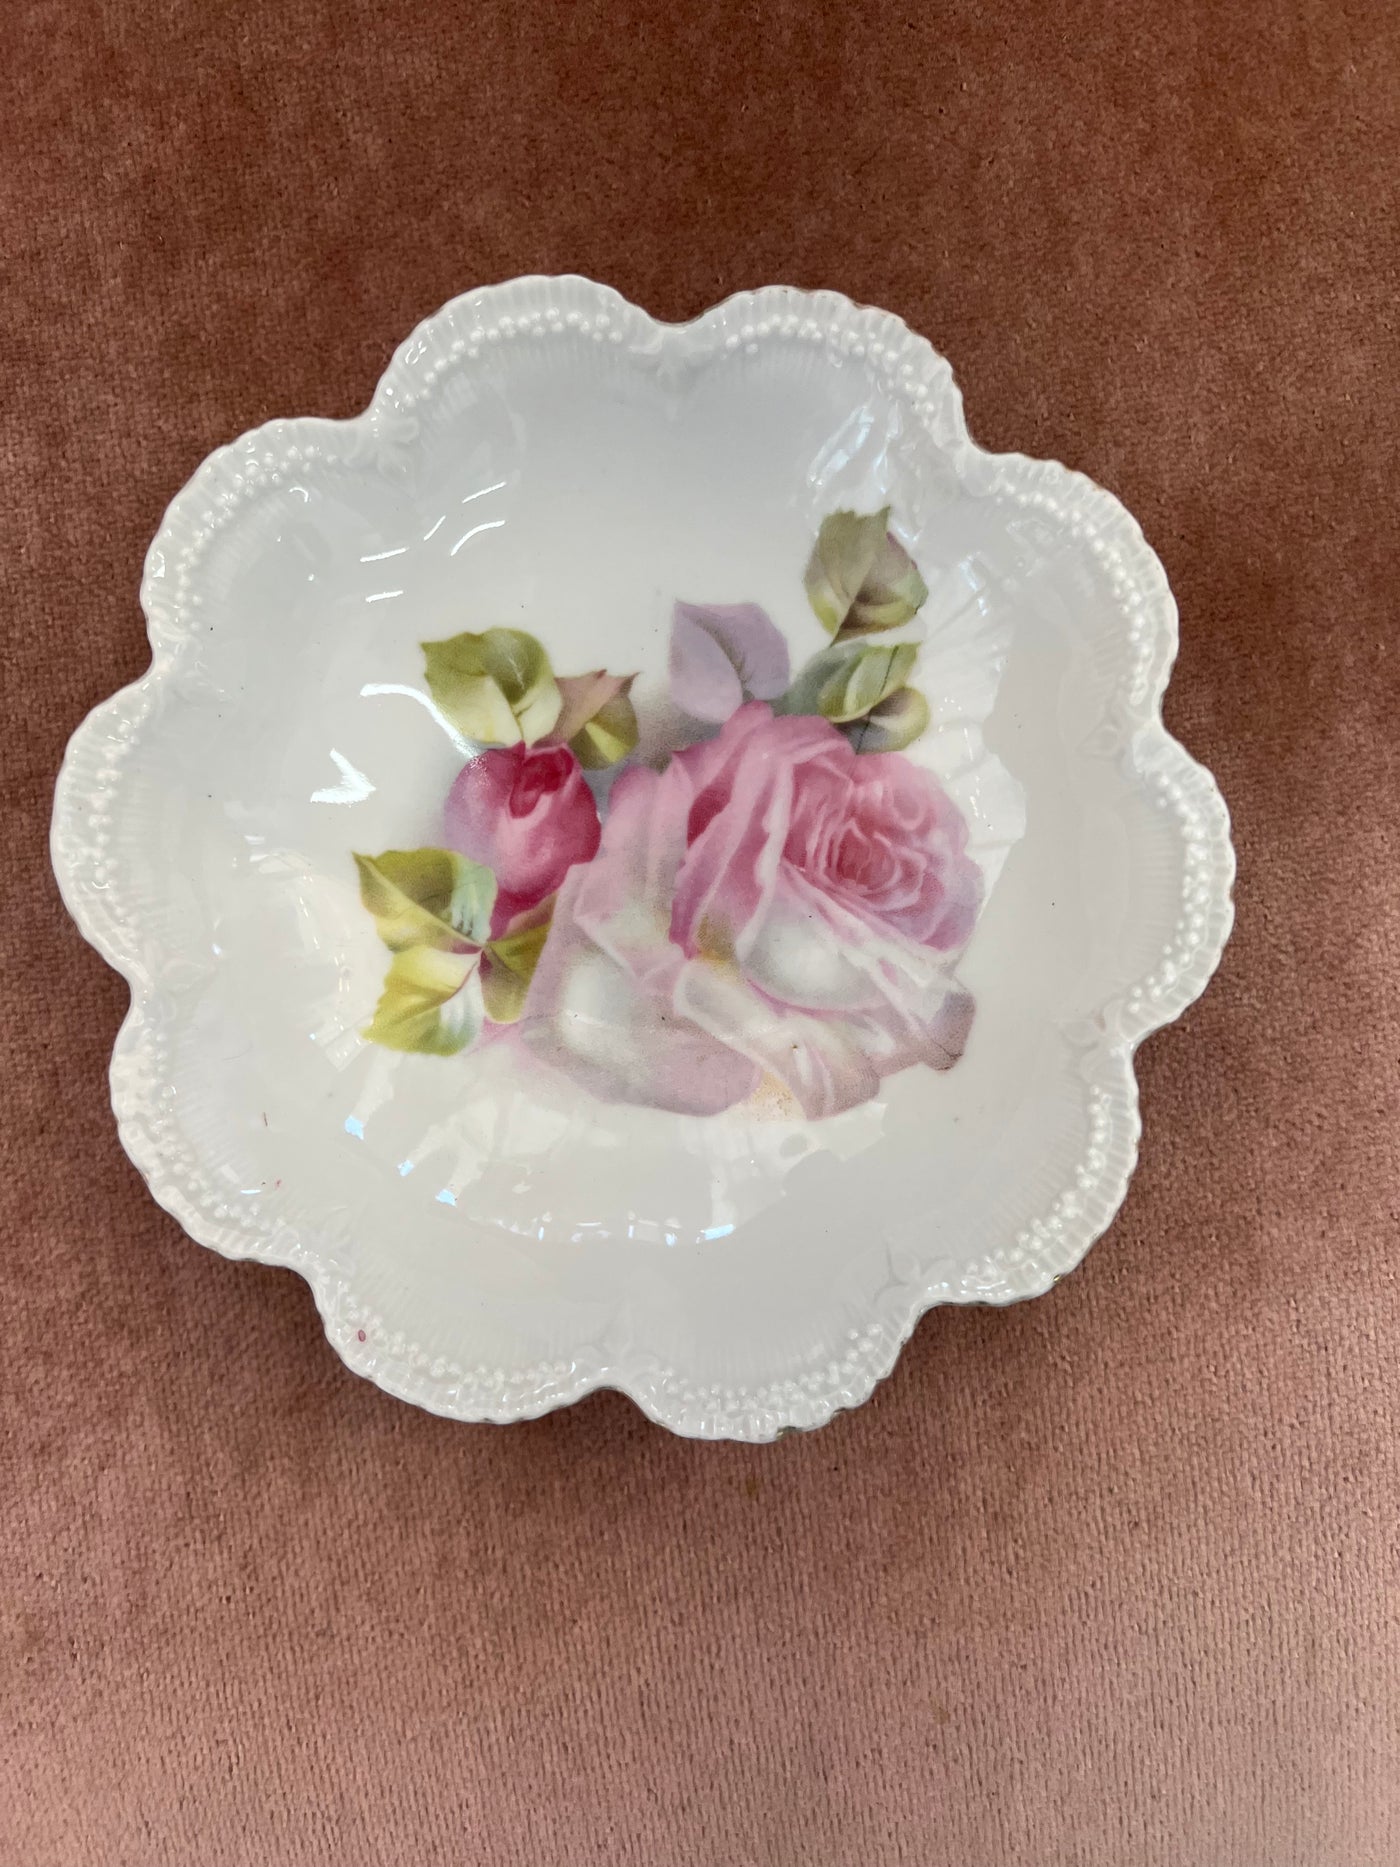 RS Germany Berry Bowl Nut Candy Floral Flowers Vintage Scalloped Edges-Graceful & Chic Boutique, Family Clothing Store in Waxahachie, Texas